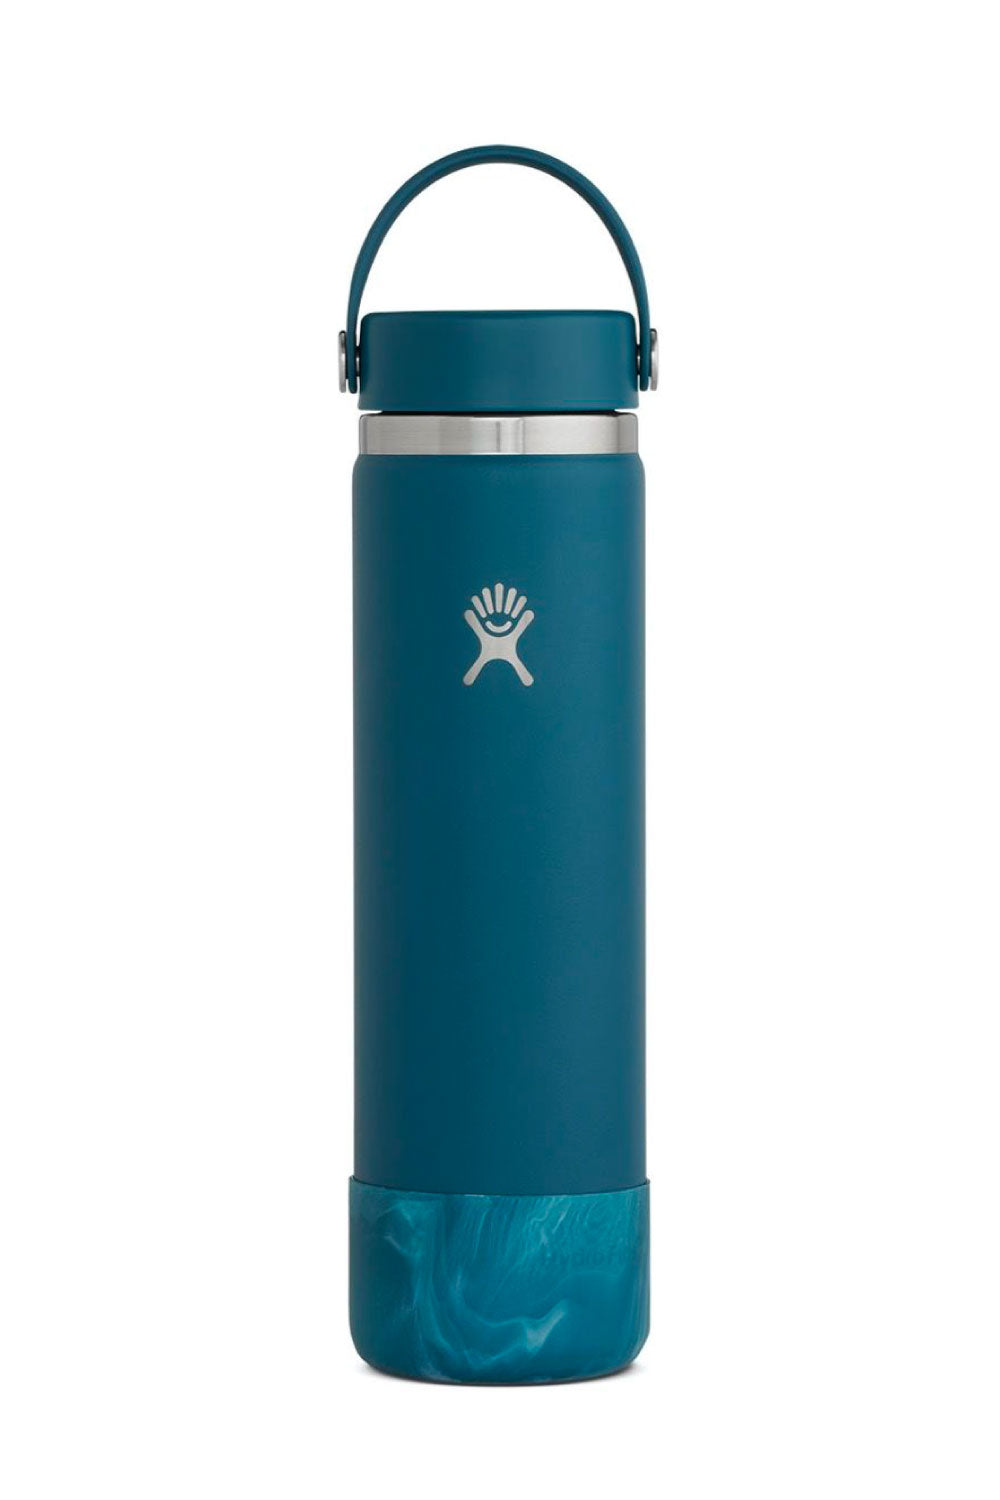 Hydro Flask Ebb & Flow Limited Edition 24oz (710ml) Wide Mouth Drink Bottle